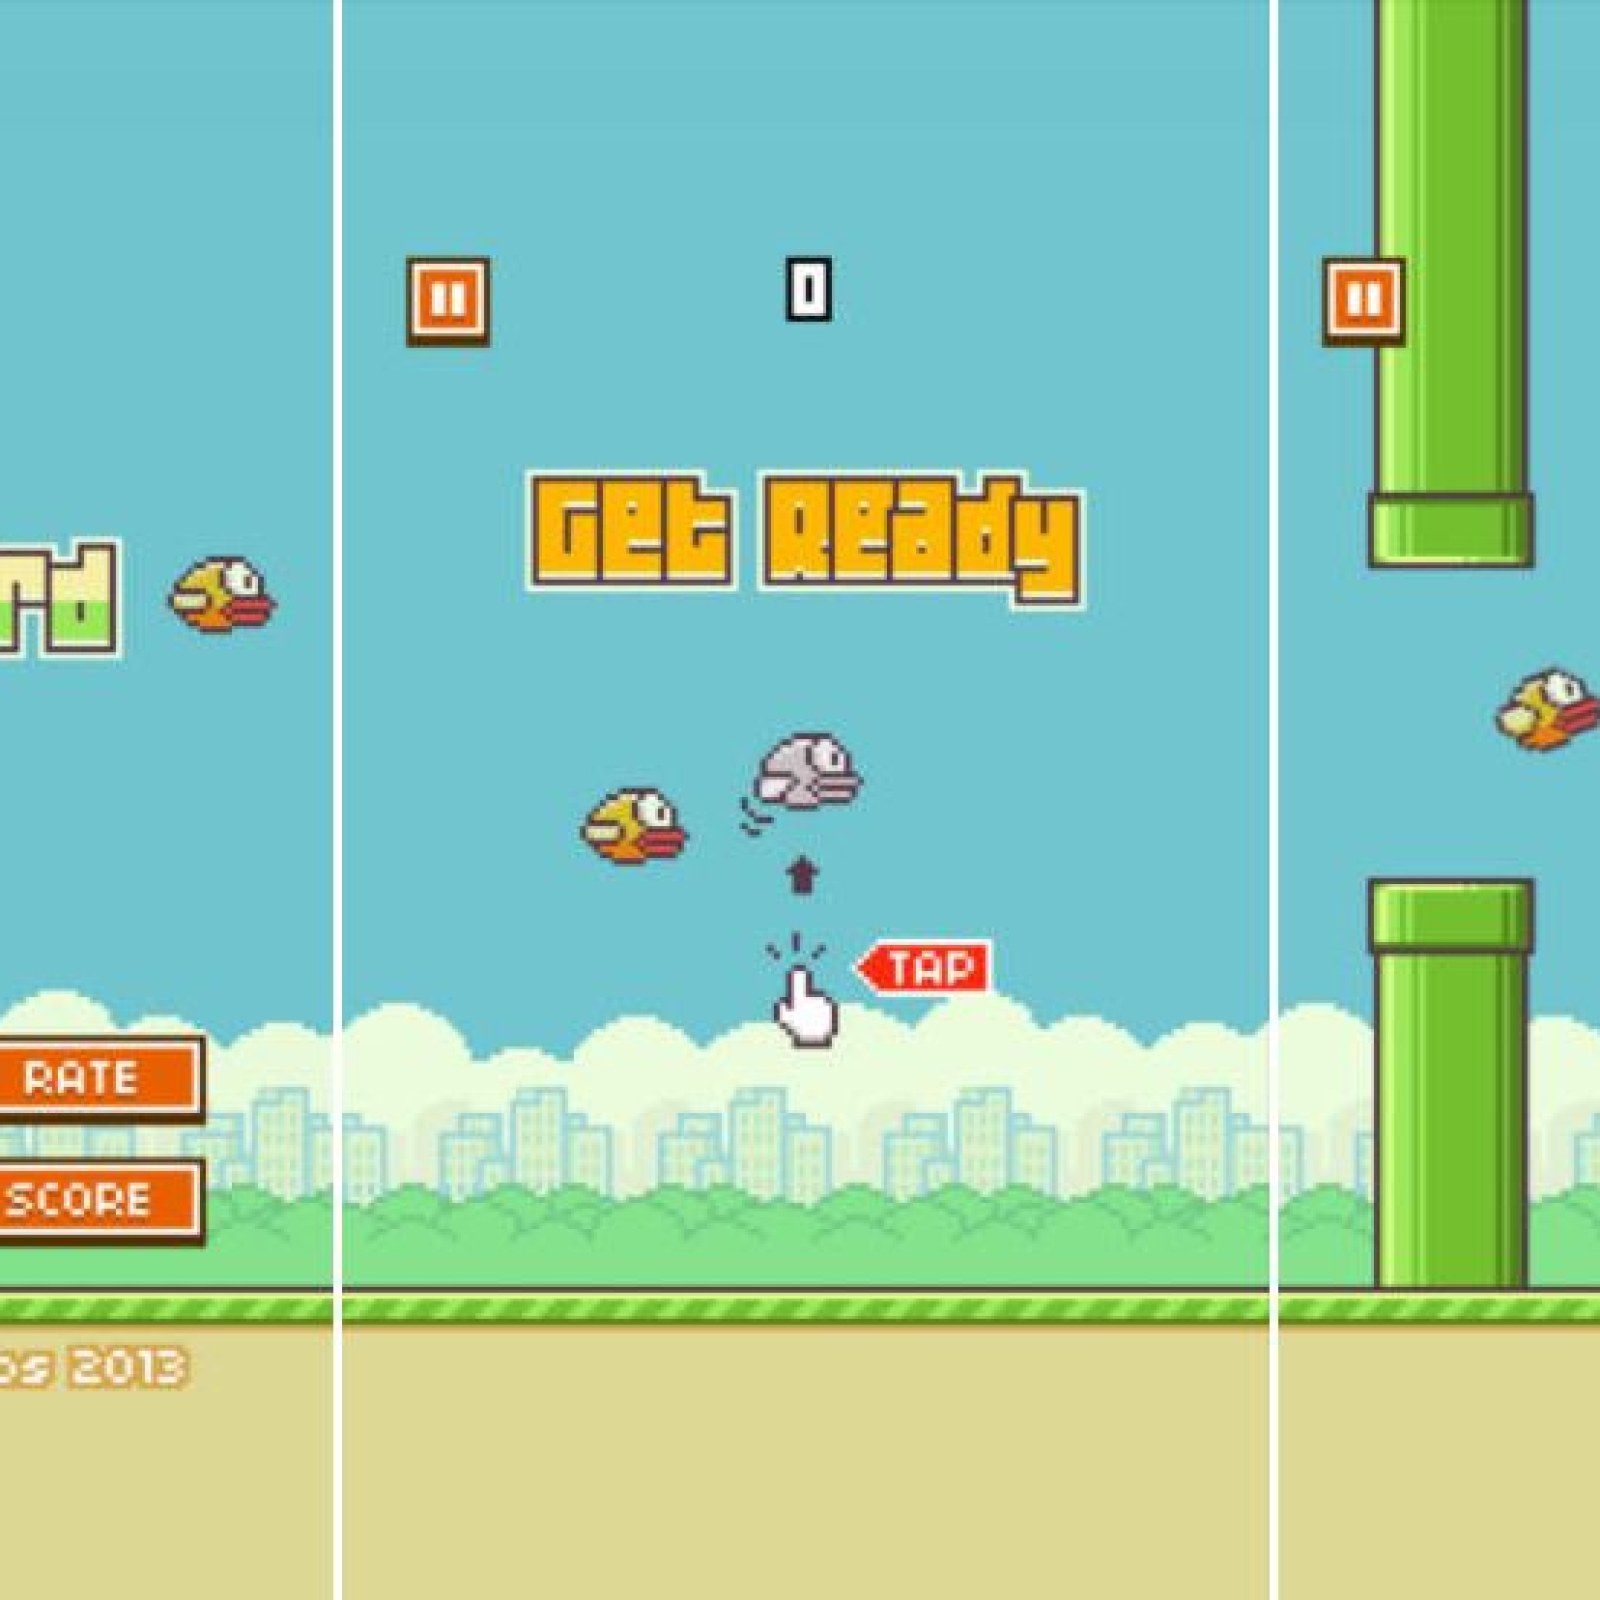 Flappy Bird Flap Continues as Hard-to-Master Game Pulled from App Store,  Google Play - Vox